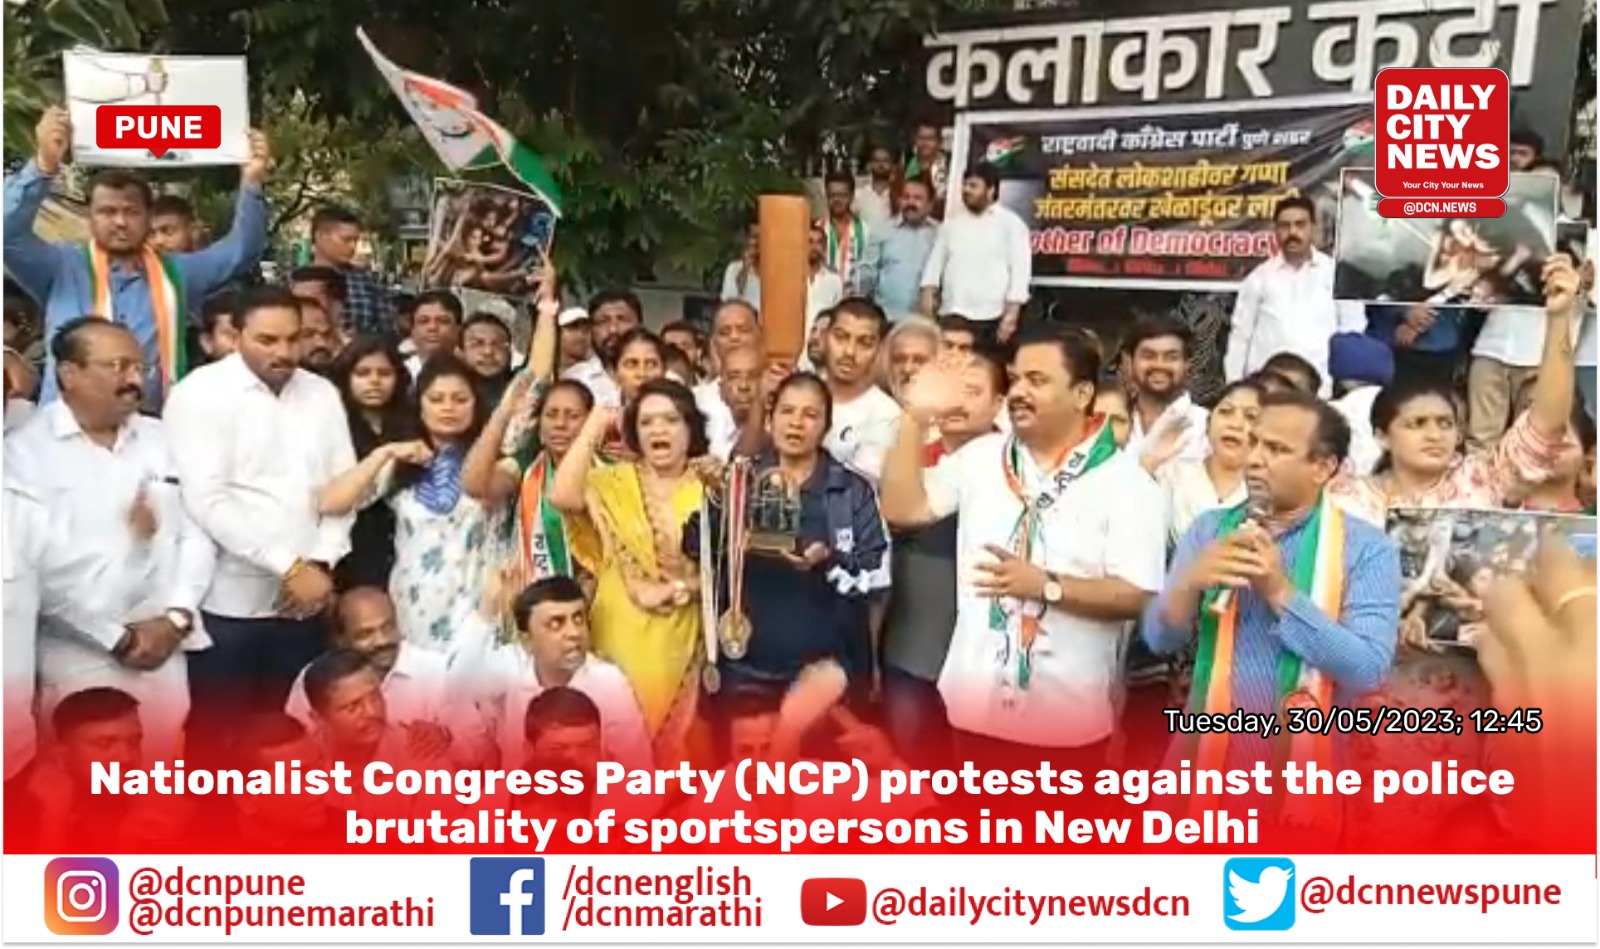 Nationalist Congress Party (NCP) protests against the police brutality of sportspersons in New Delhi